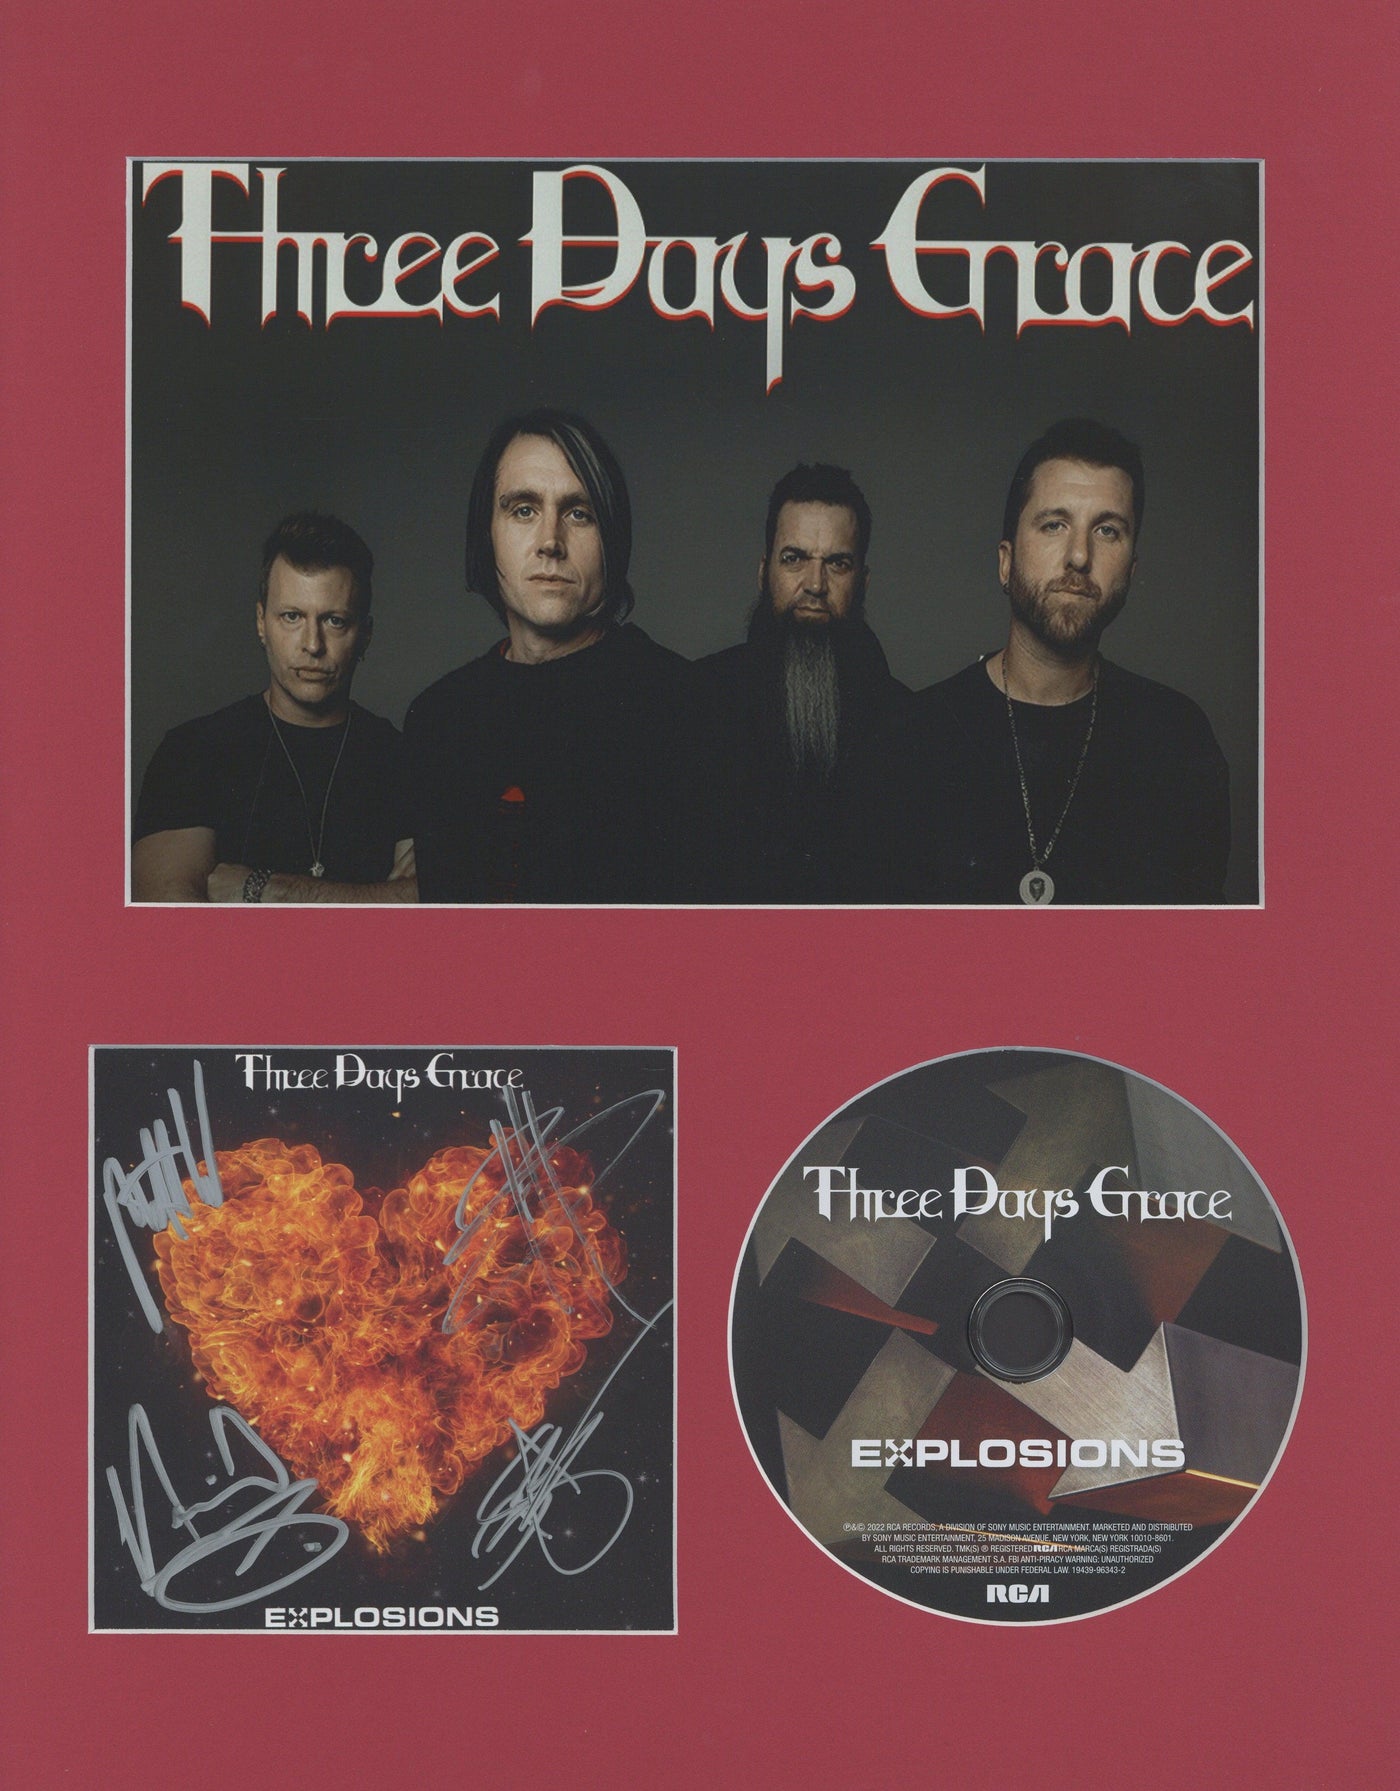 Three Days Grace SIGNED CD Cover FRAMED AutographCOA